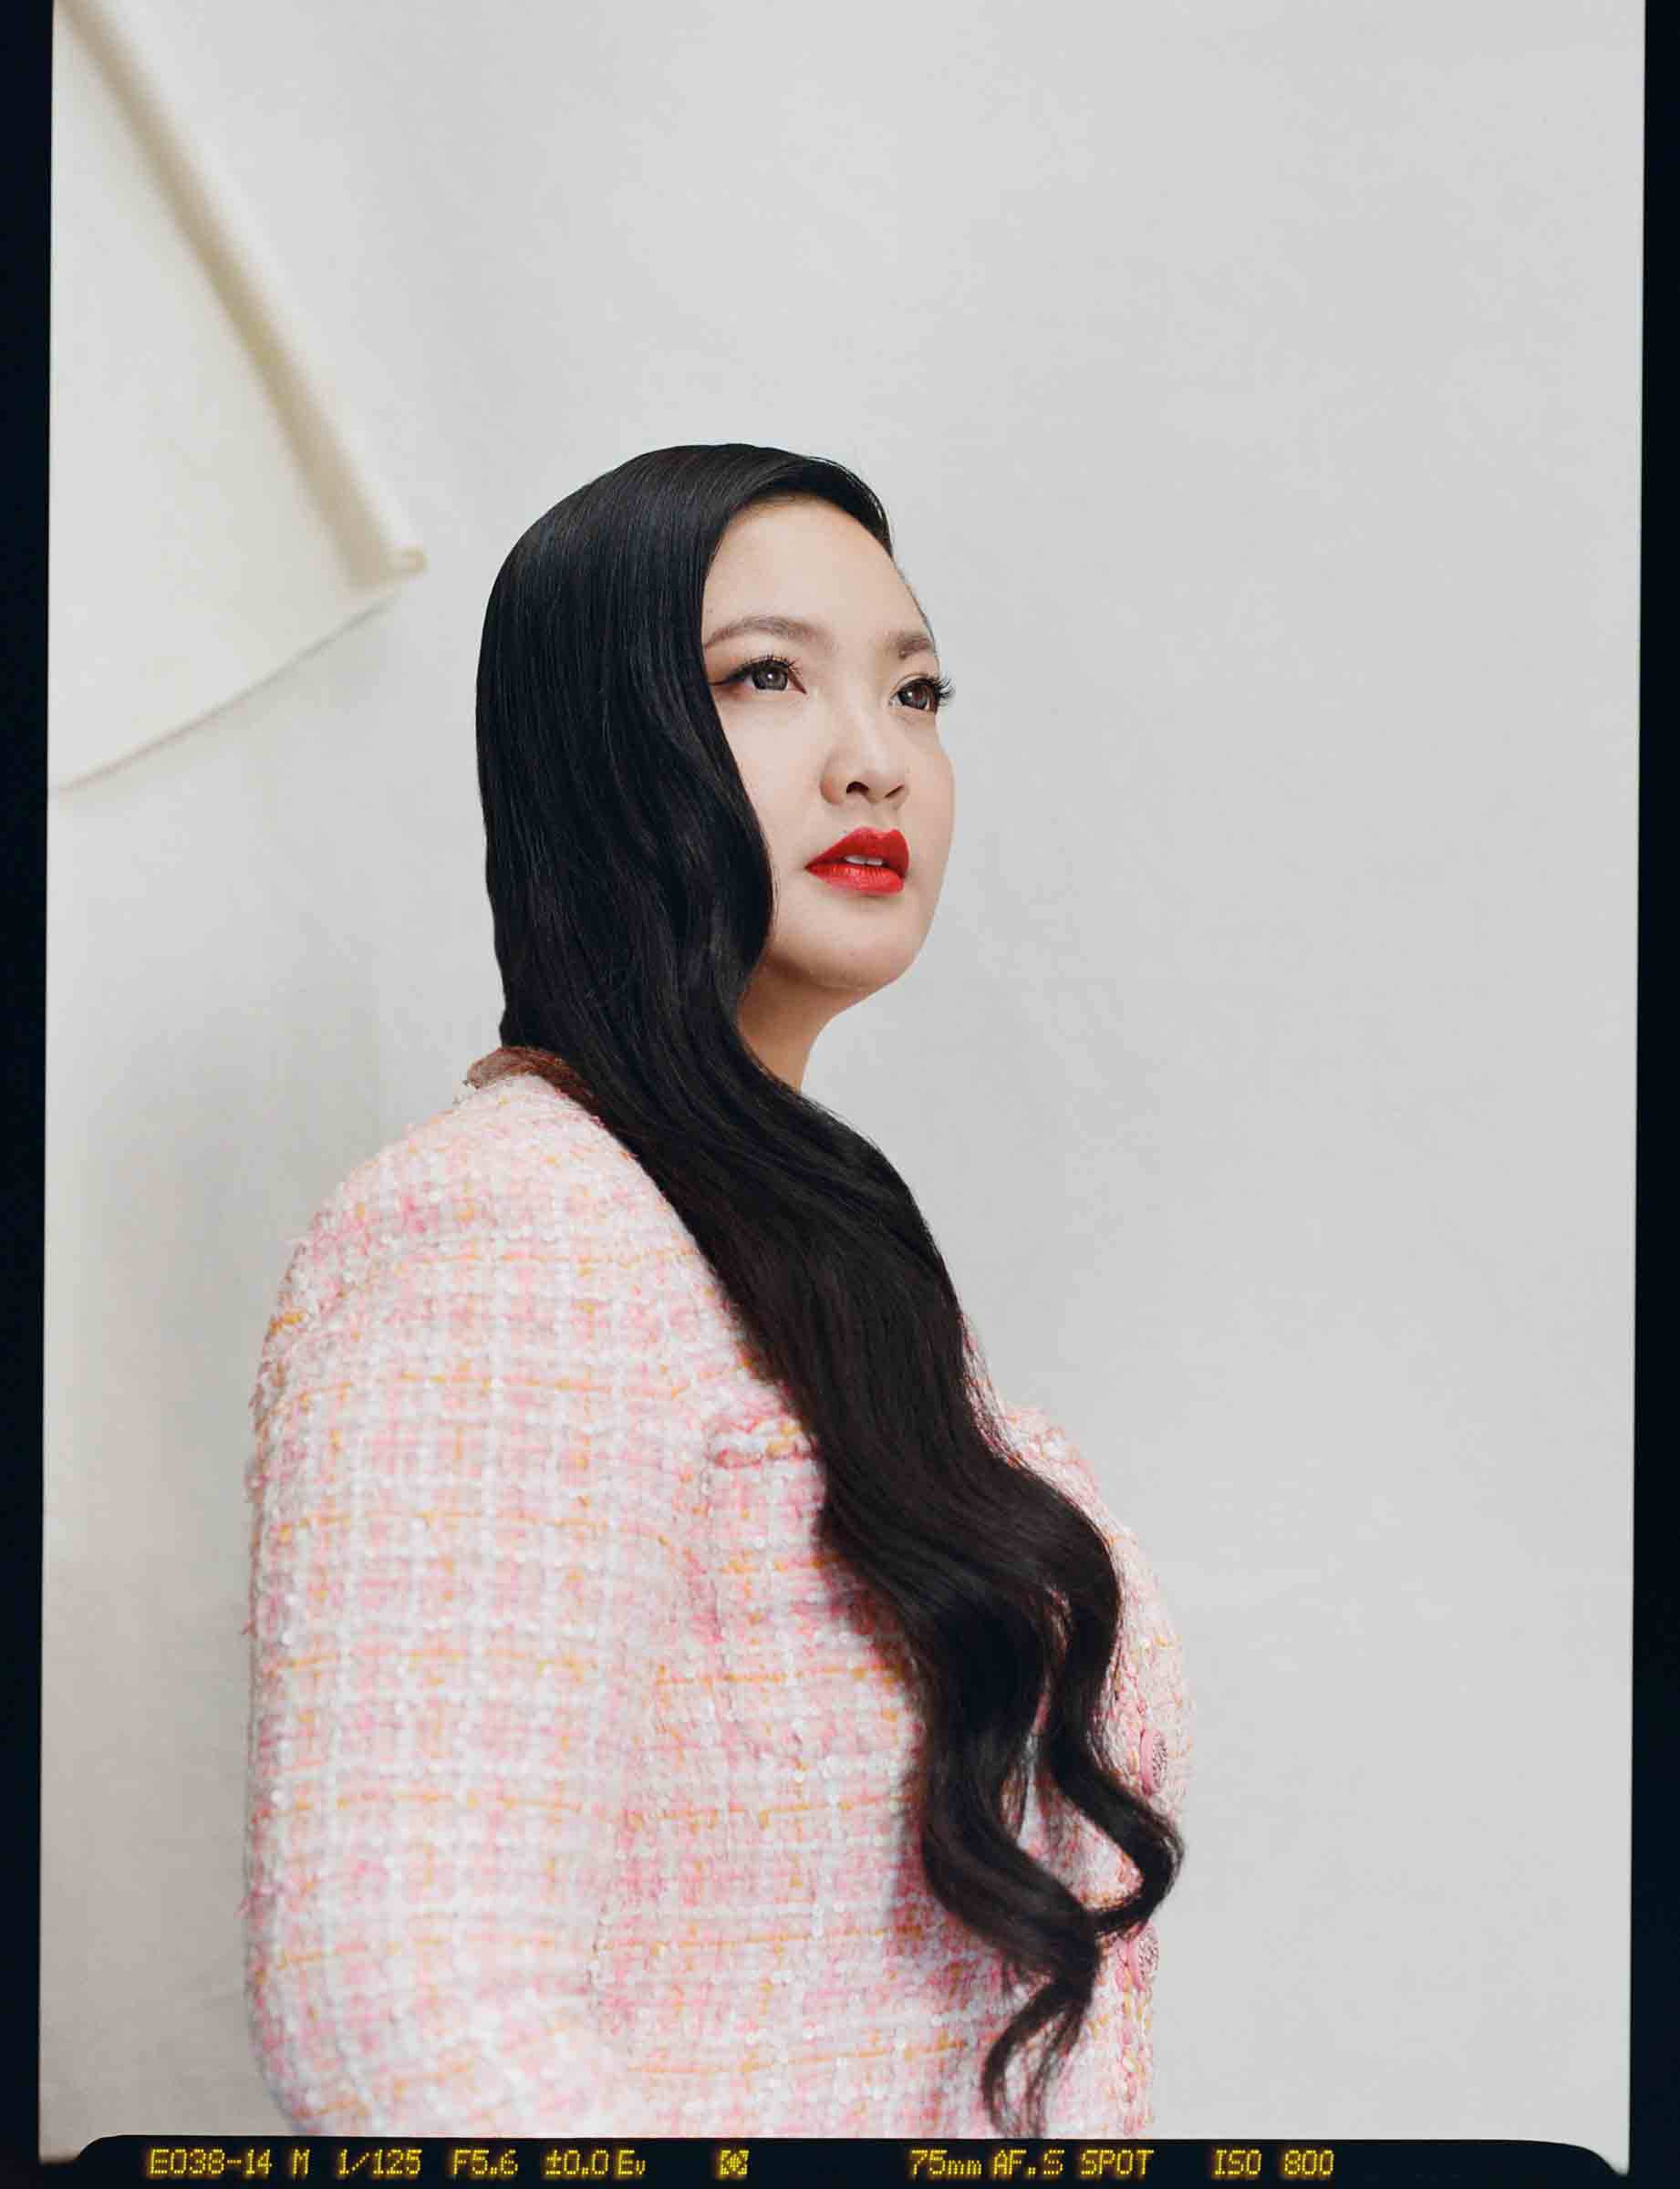 <strong>Amanda Nguyen</strong>. "<a href="https://time.com/100-women-of-the-year/">Women of the Year.</a>" (Camila Falquez for TIME)